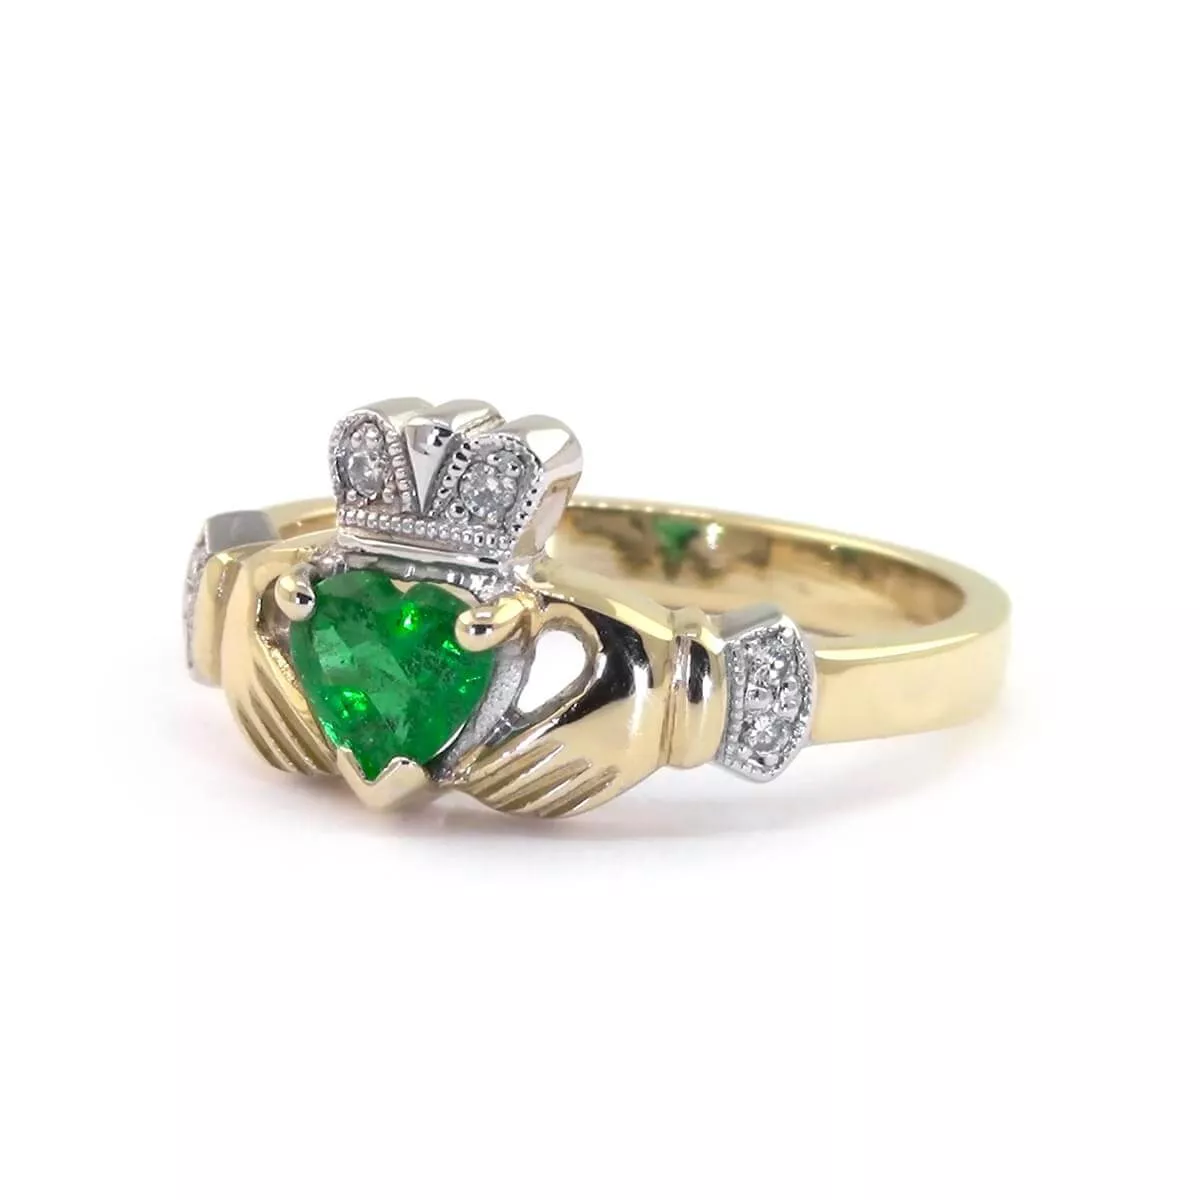 4 Claddagh Ring With Emerald 4 4